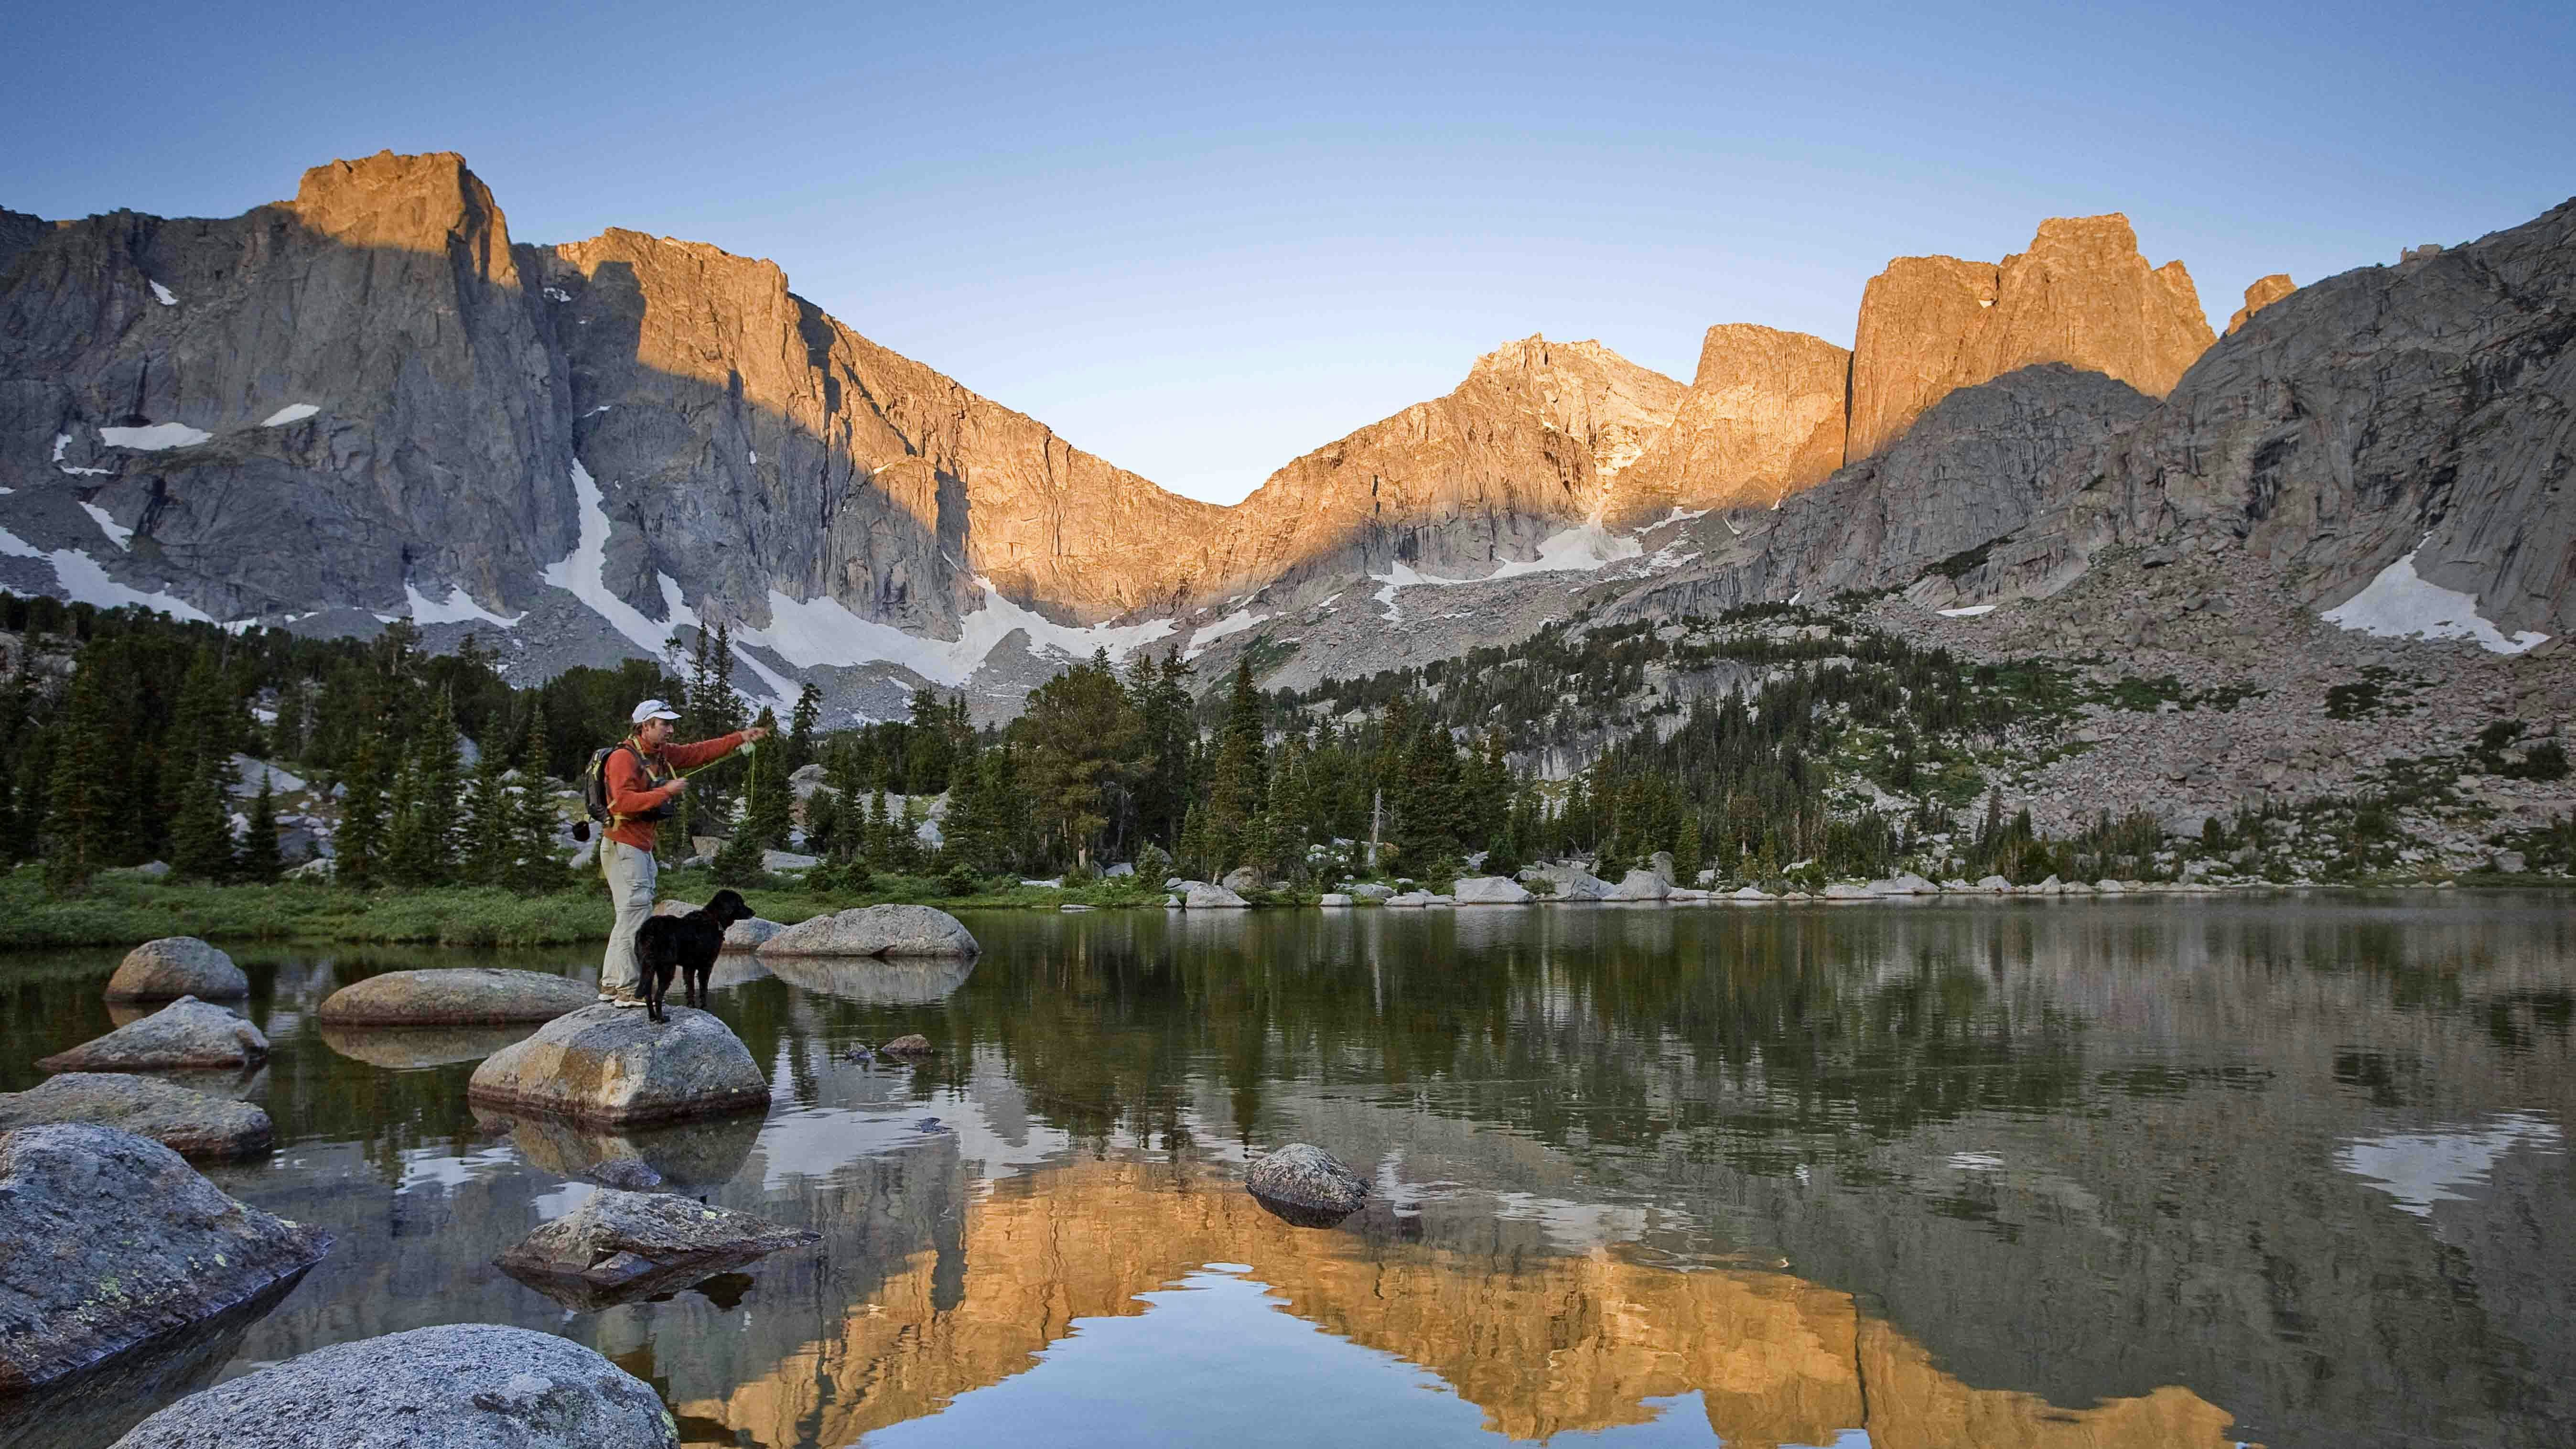 Fly fisherman in a lake below the Cirque of the Towers, Wind River Range, Wyoming